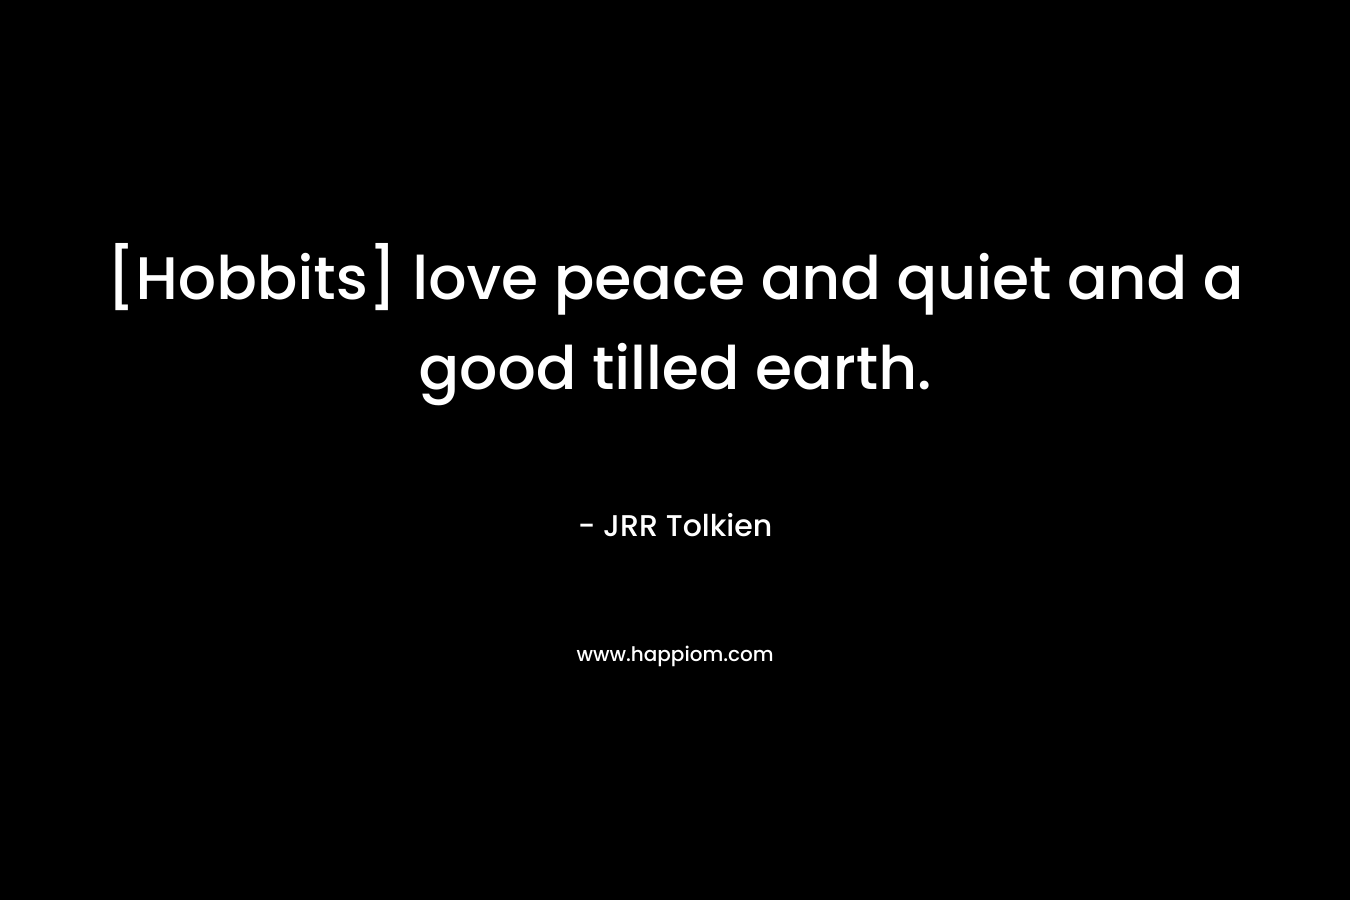 [Hobbits] love peace and quiet and a good tilled earth.